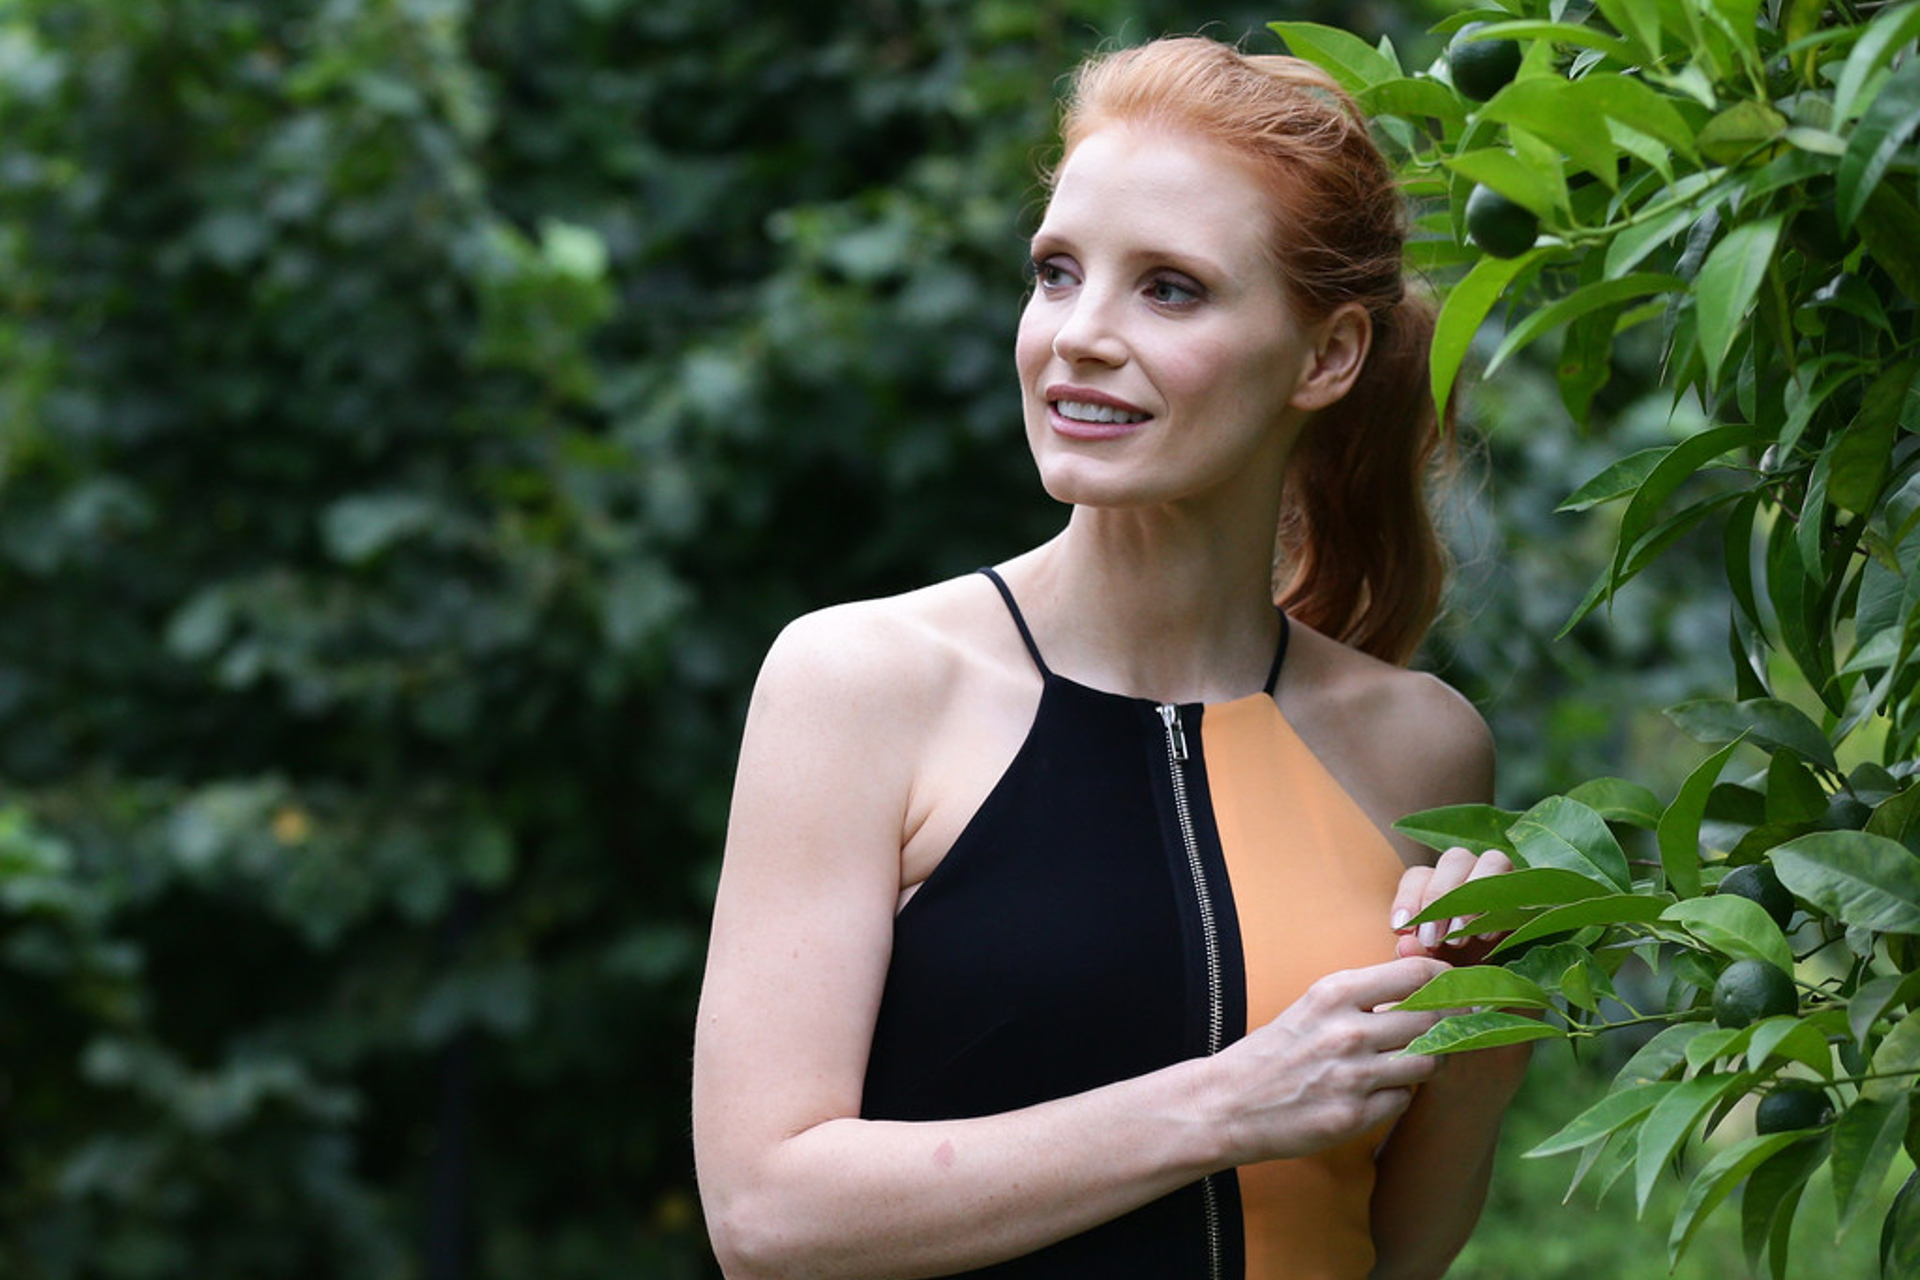 Download Smile American Blue Eyes Redhead Actress Celebrity Jessica Chastain Hd Wallpaper 4008